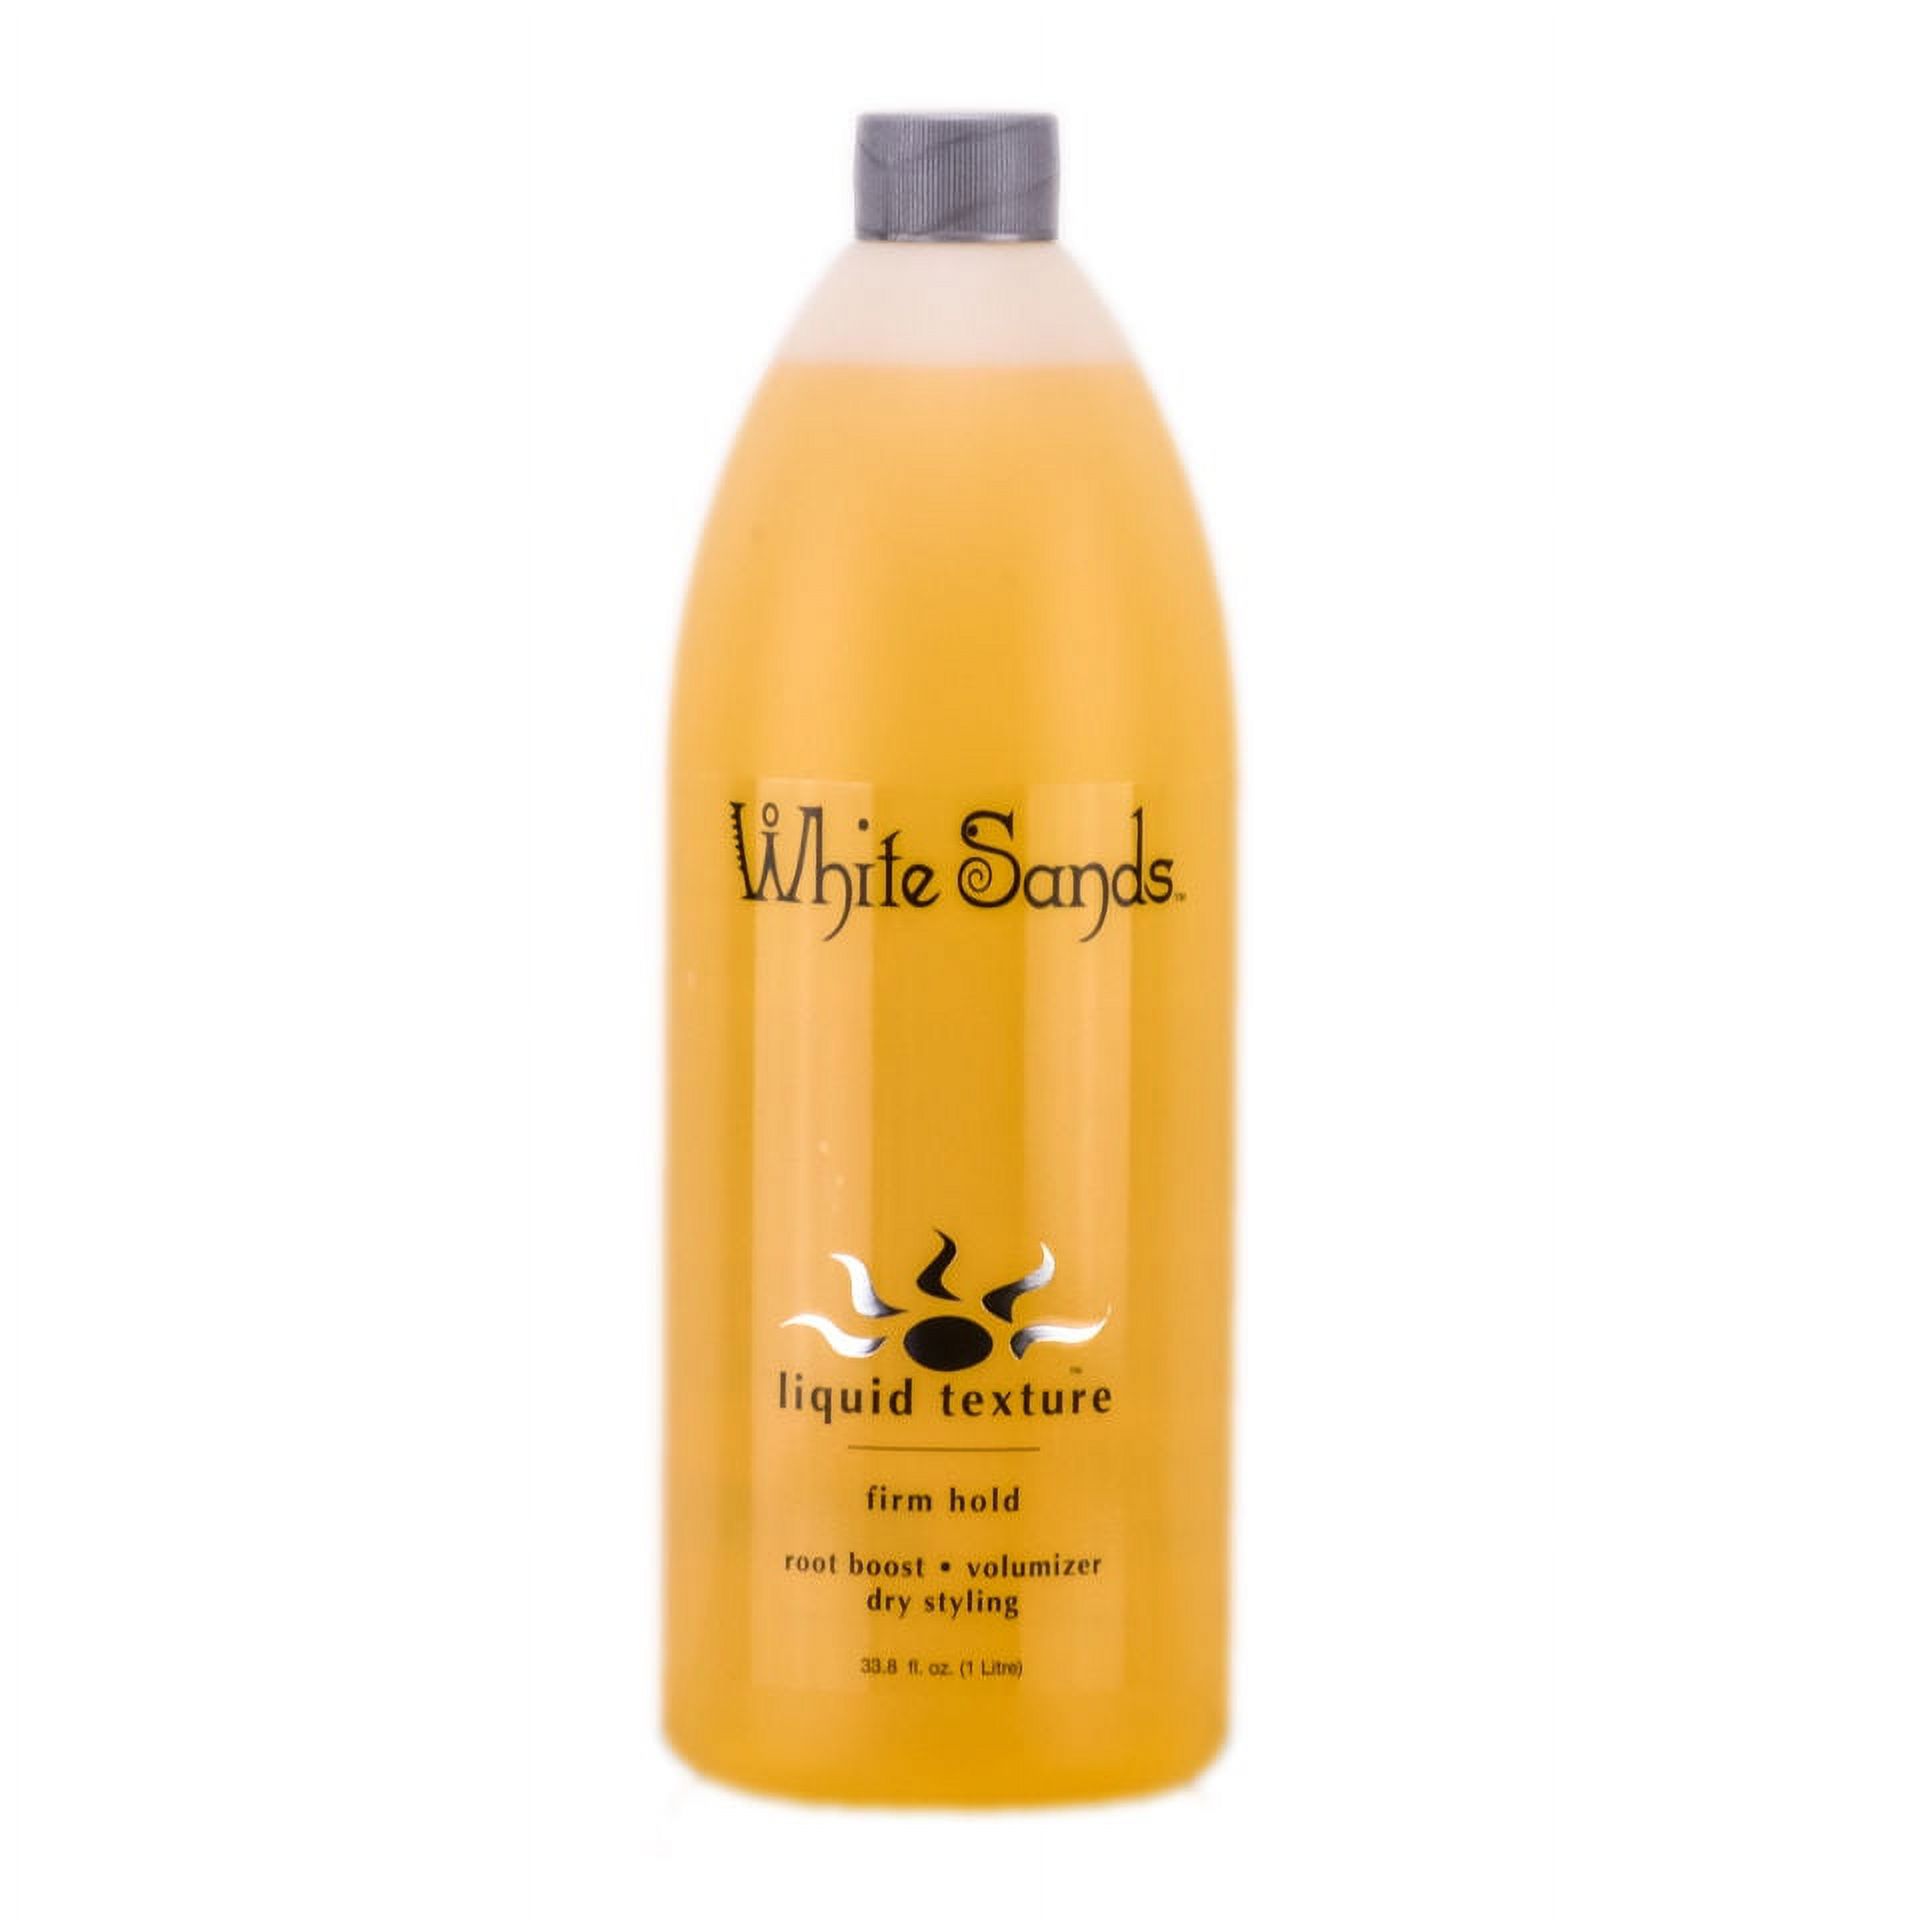 White Sands Liquid Texture - Firm Hold Extreme Hairspray (33.8 oz / liter refill) - image 2 of 2